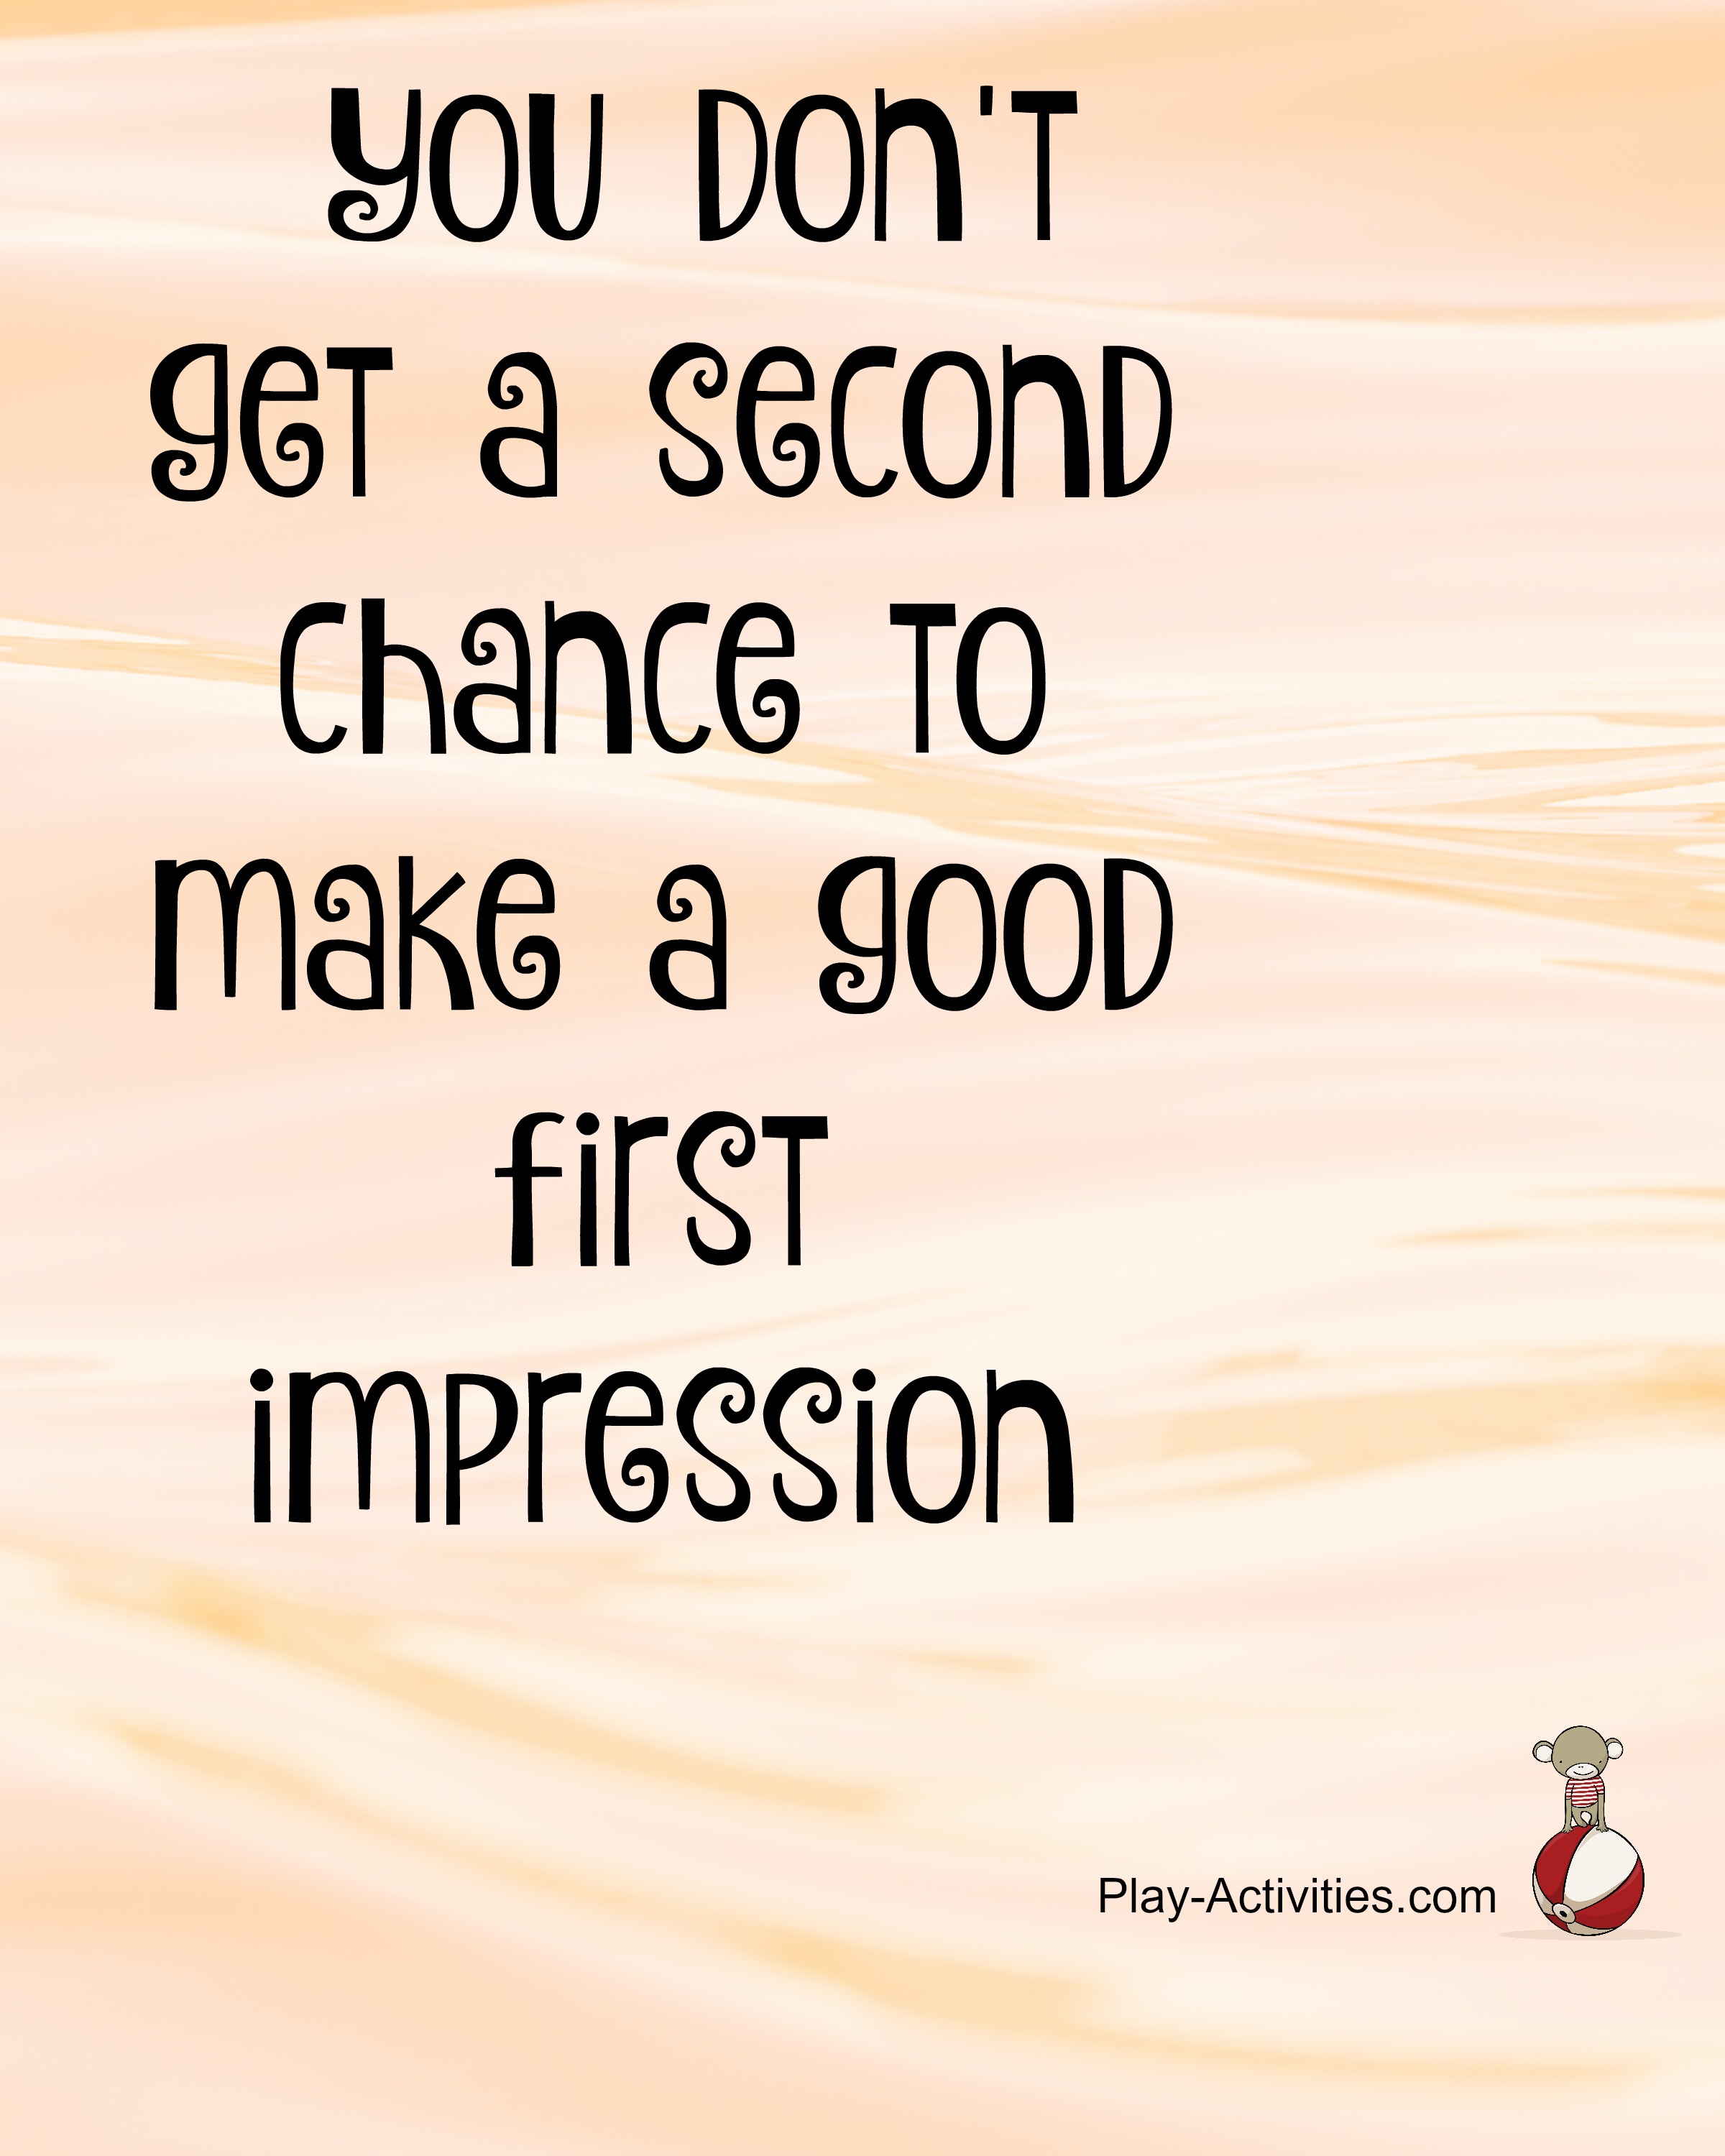  You don't get a second chance to make a first impression